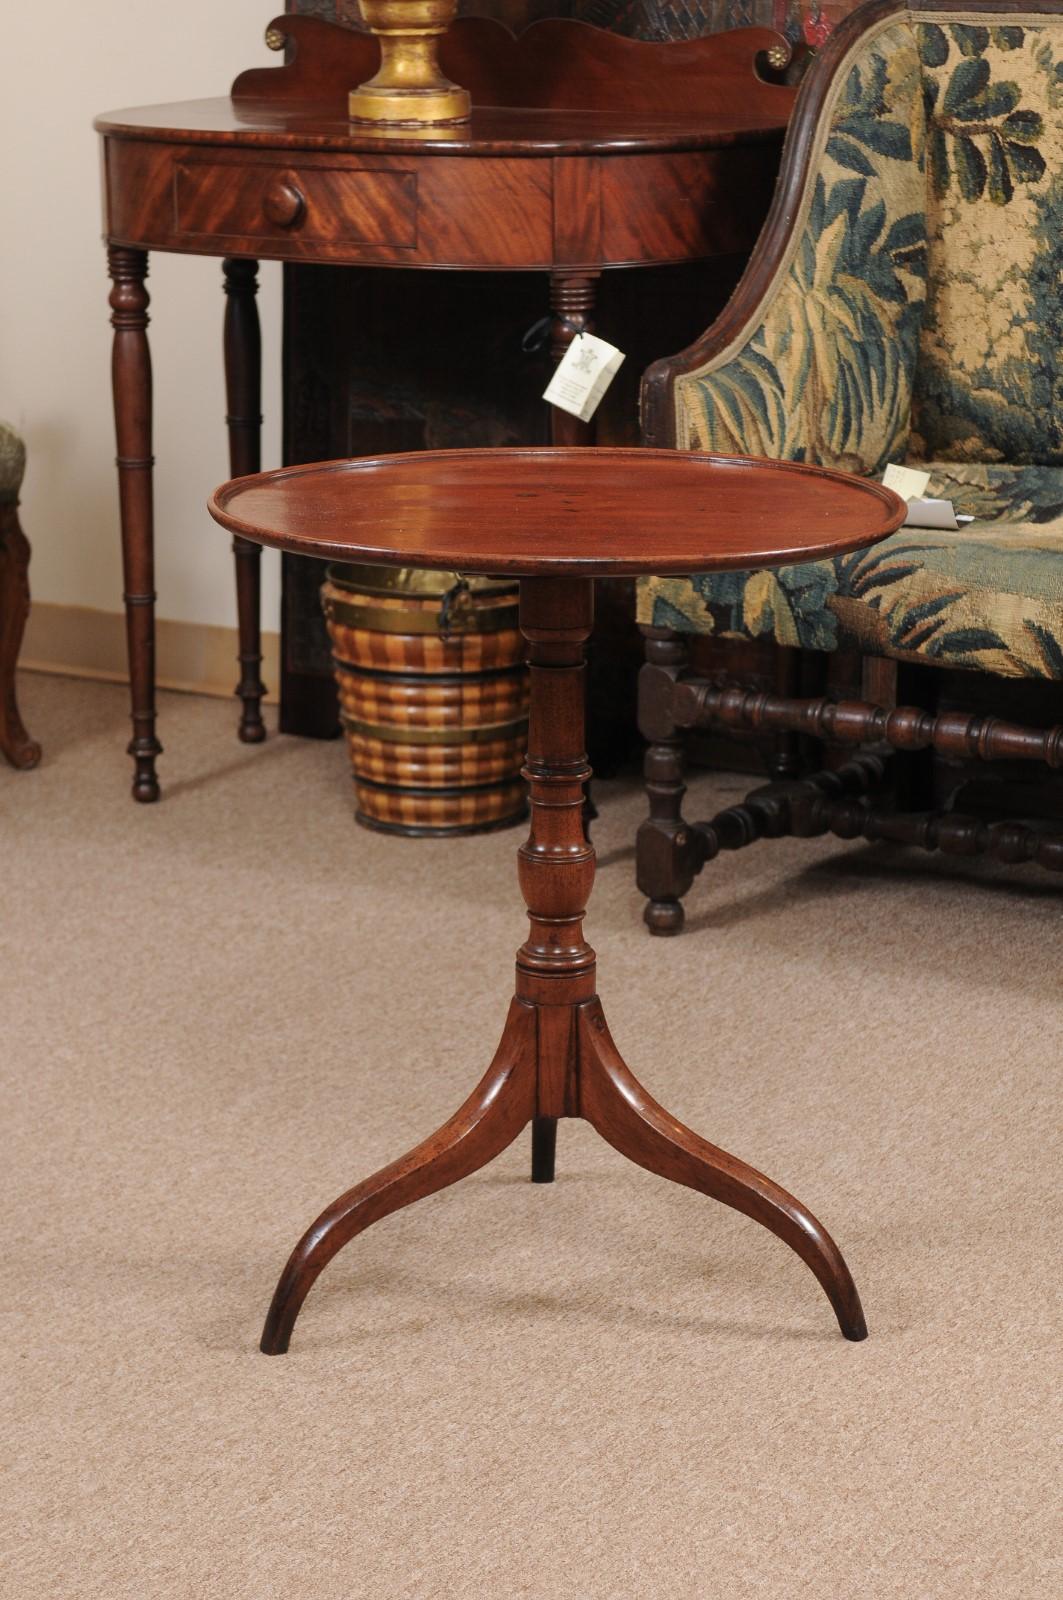 New England Federal candle stand table in walnut with circular, tilting mechanism, tripod base with tapered curved legs.